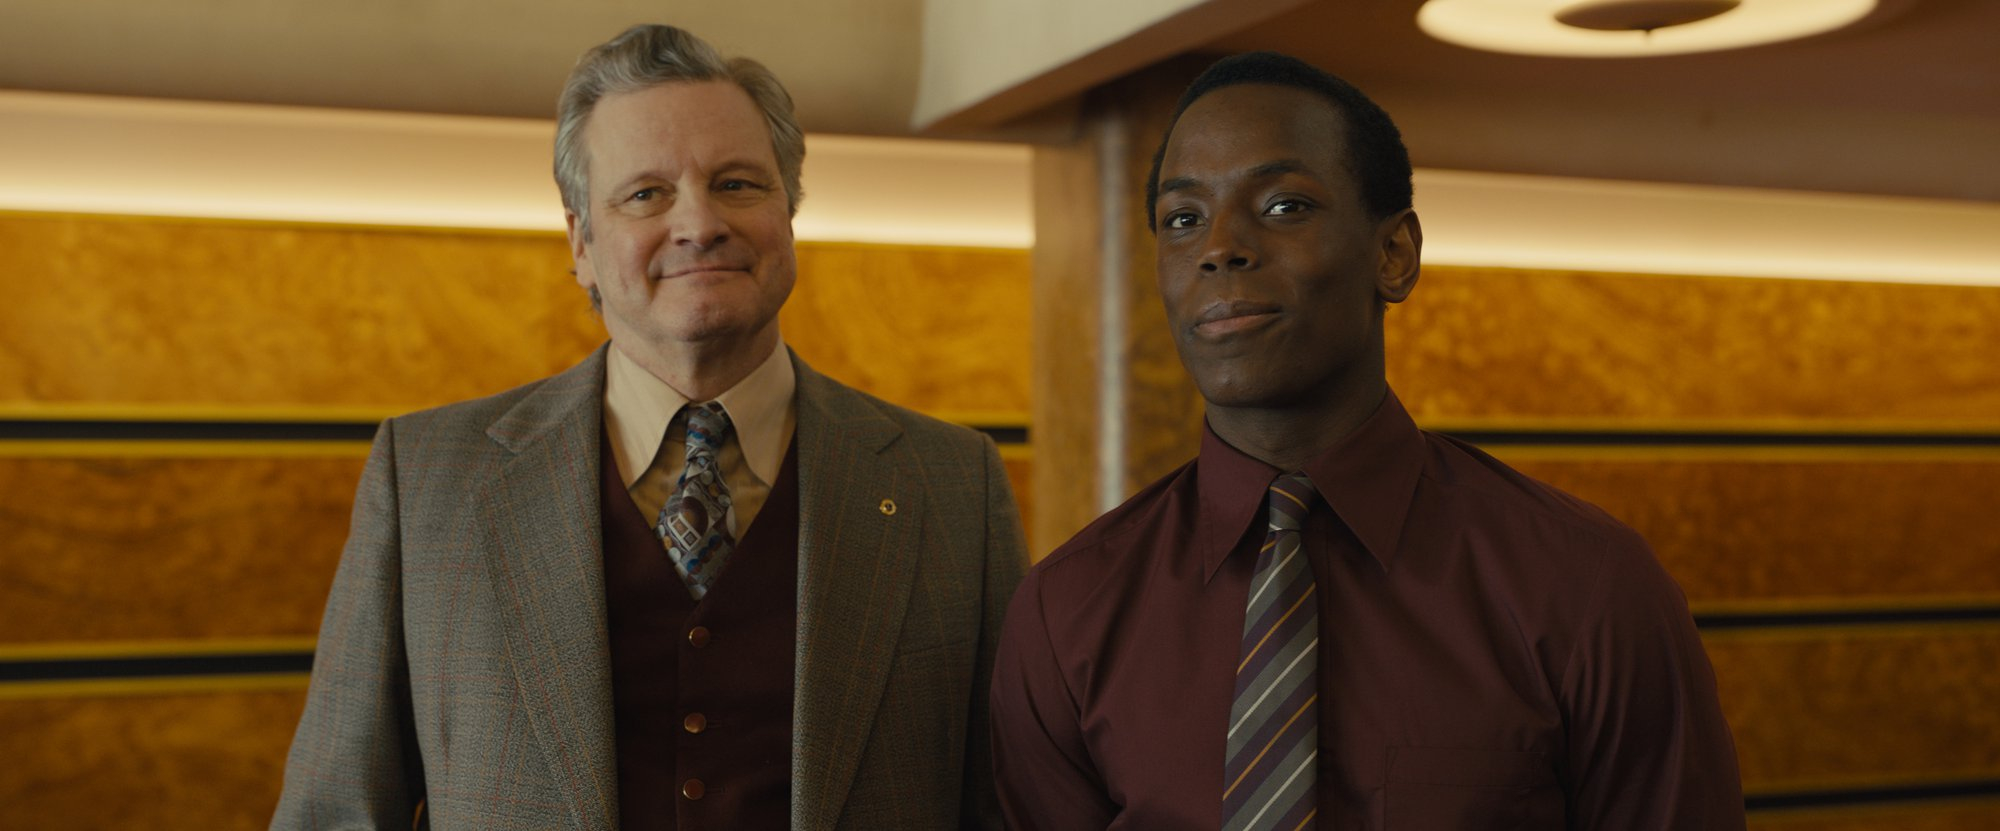 'Empire of Light' Colin Firth as Donald Ellis and Micheal Ward as Stephen. They're standing next to each other wearing suit and ties smiling in front of wall with wooden panels behind them